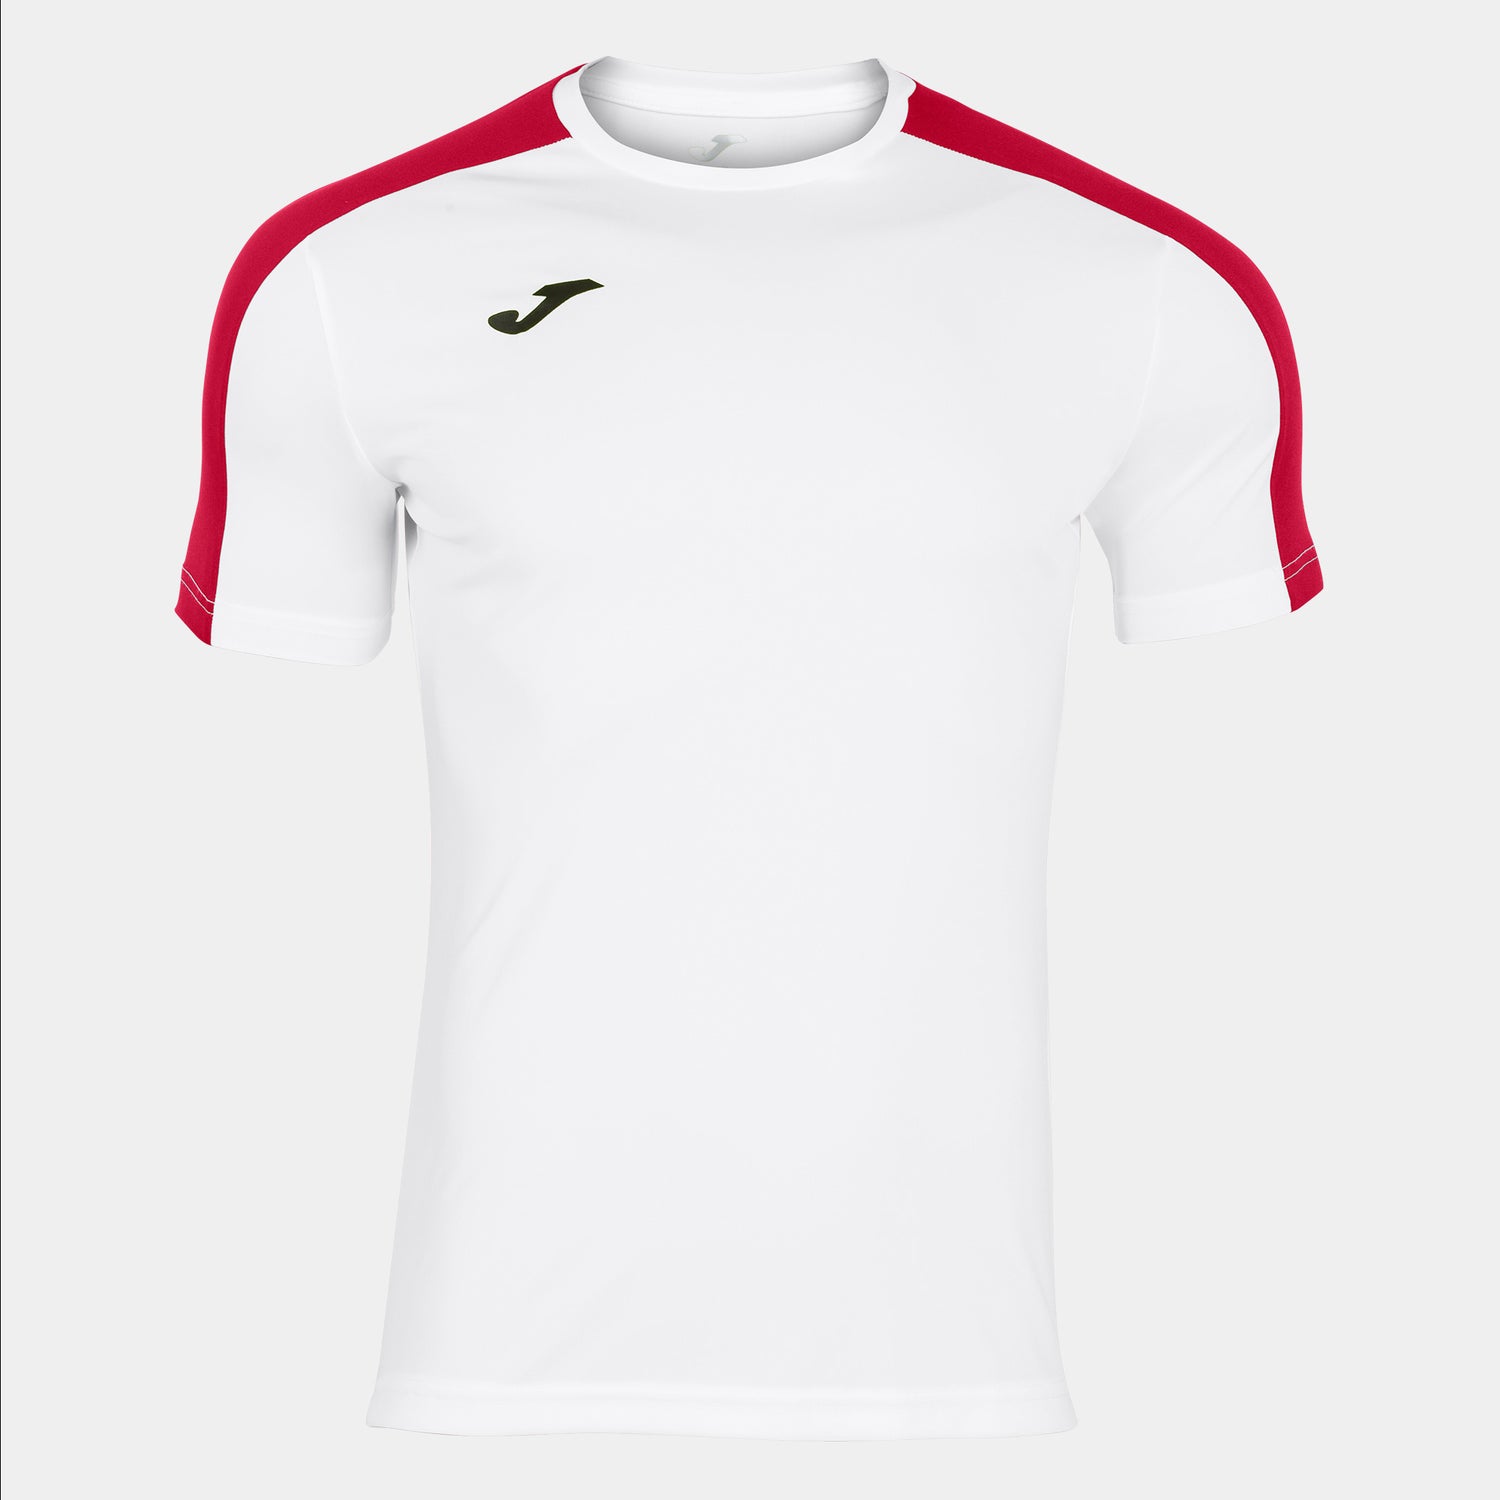 Joma Soccer Jersey available in Joma Canada Store. Customize your teamwear with sponsors and numbers. Joma is shipping in Canada.